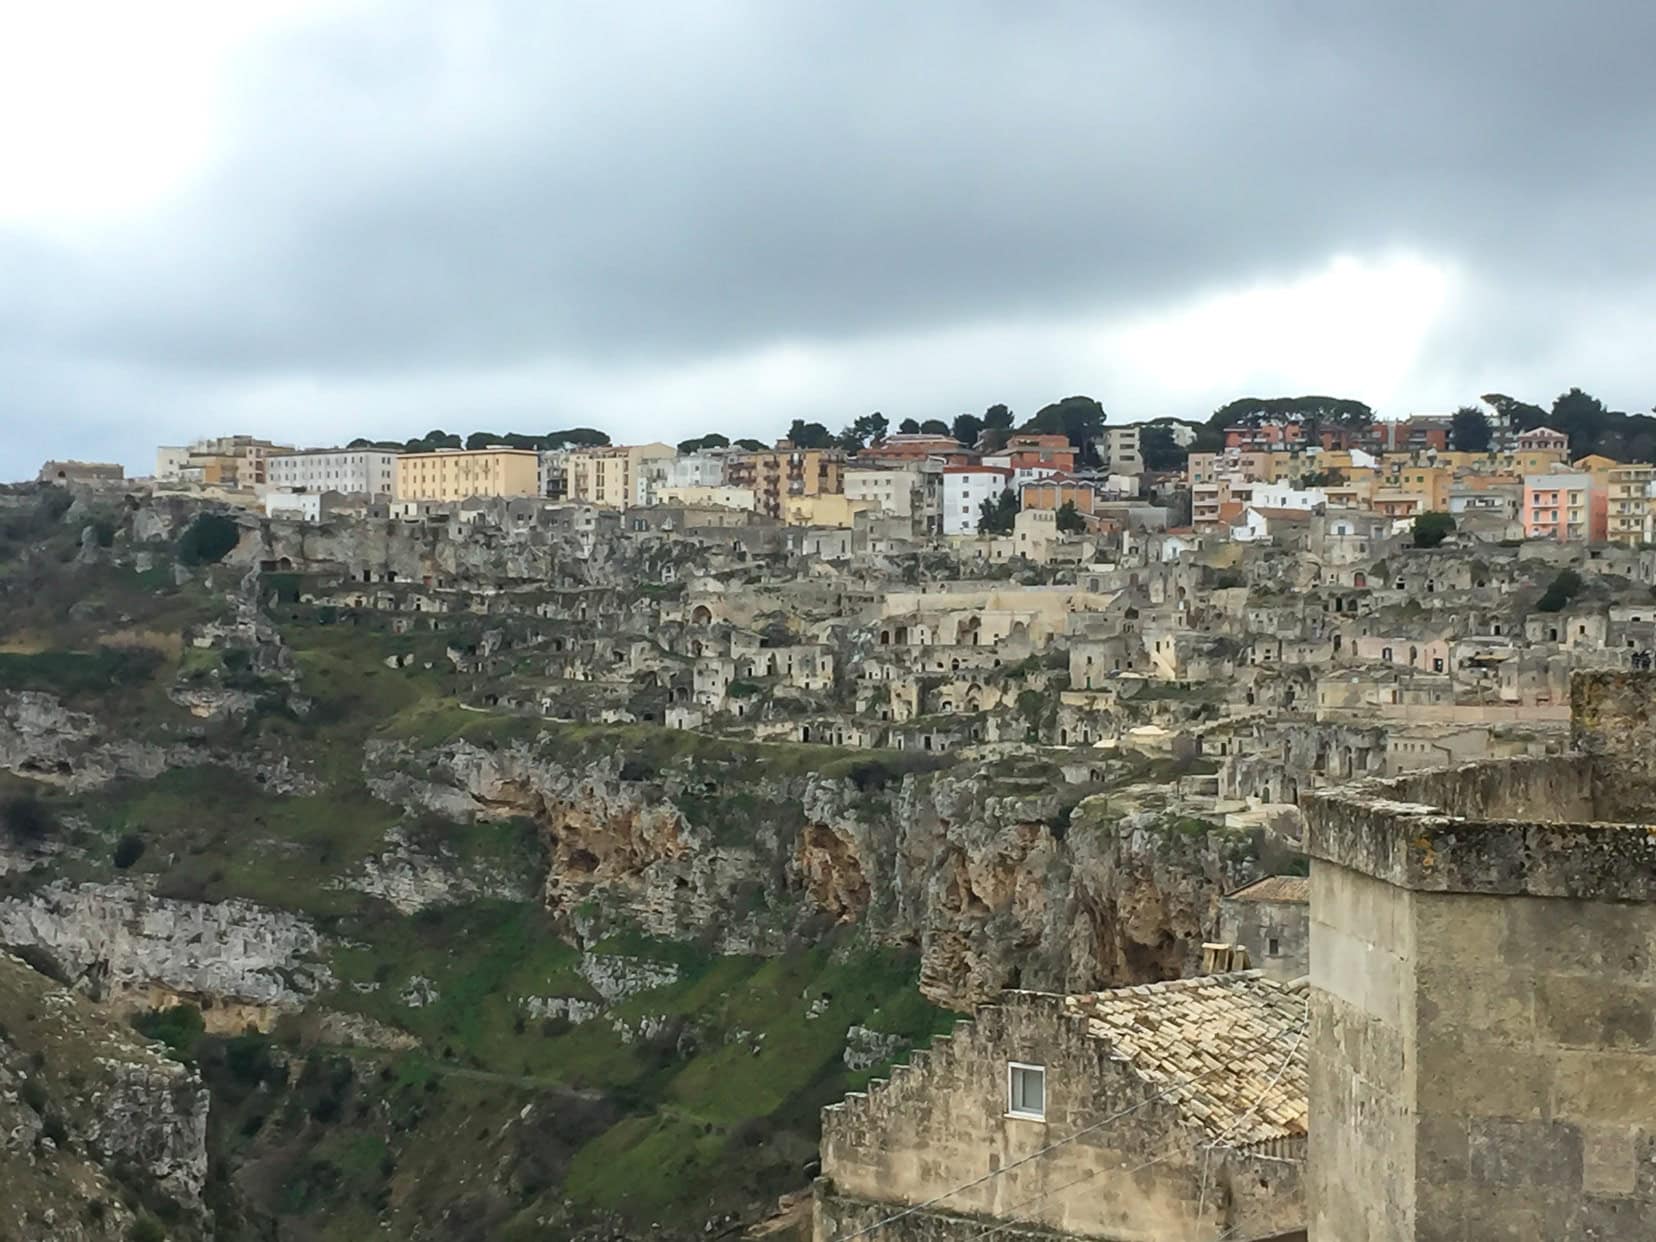 Modern Matera in the background, overlooking the old Sassi di Matera 